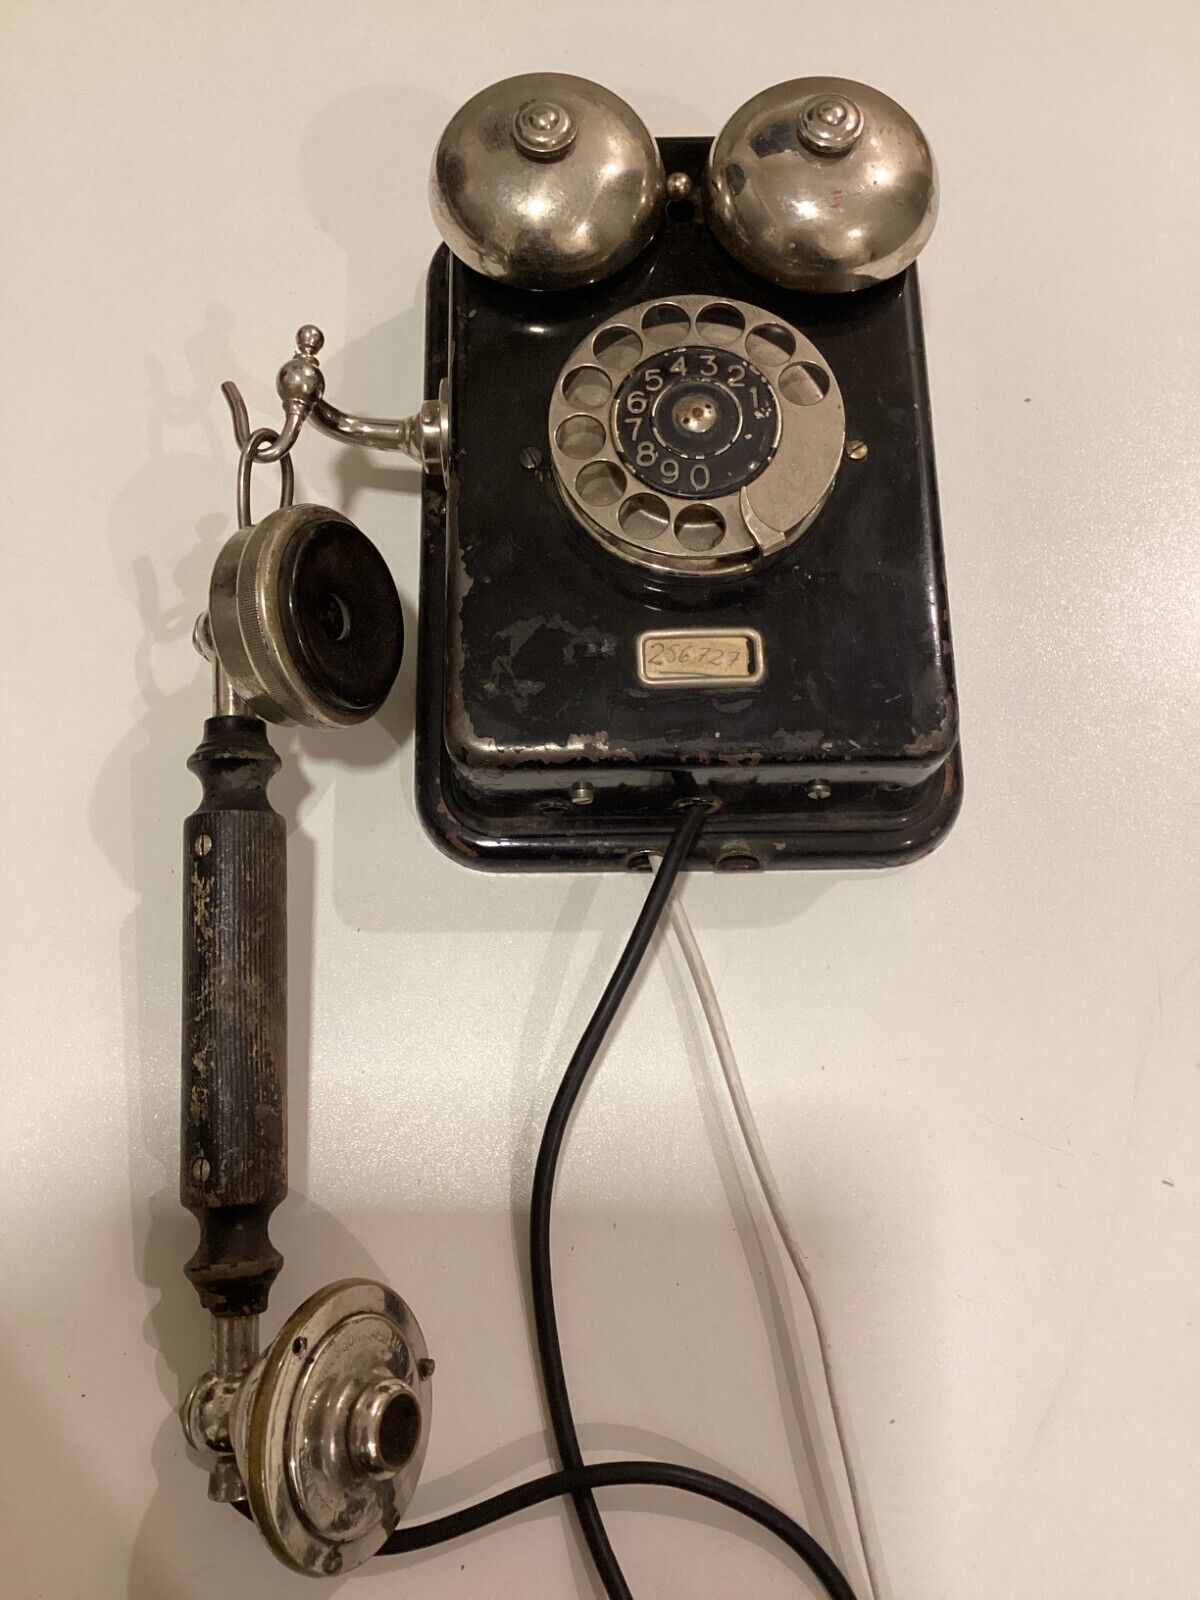 LM ERICSSON DE 100 WALL PHONE ANTIQUE 1920s MADE IN SWEDEN